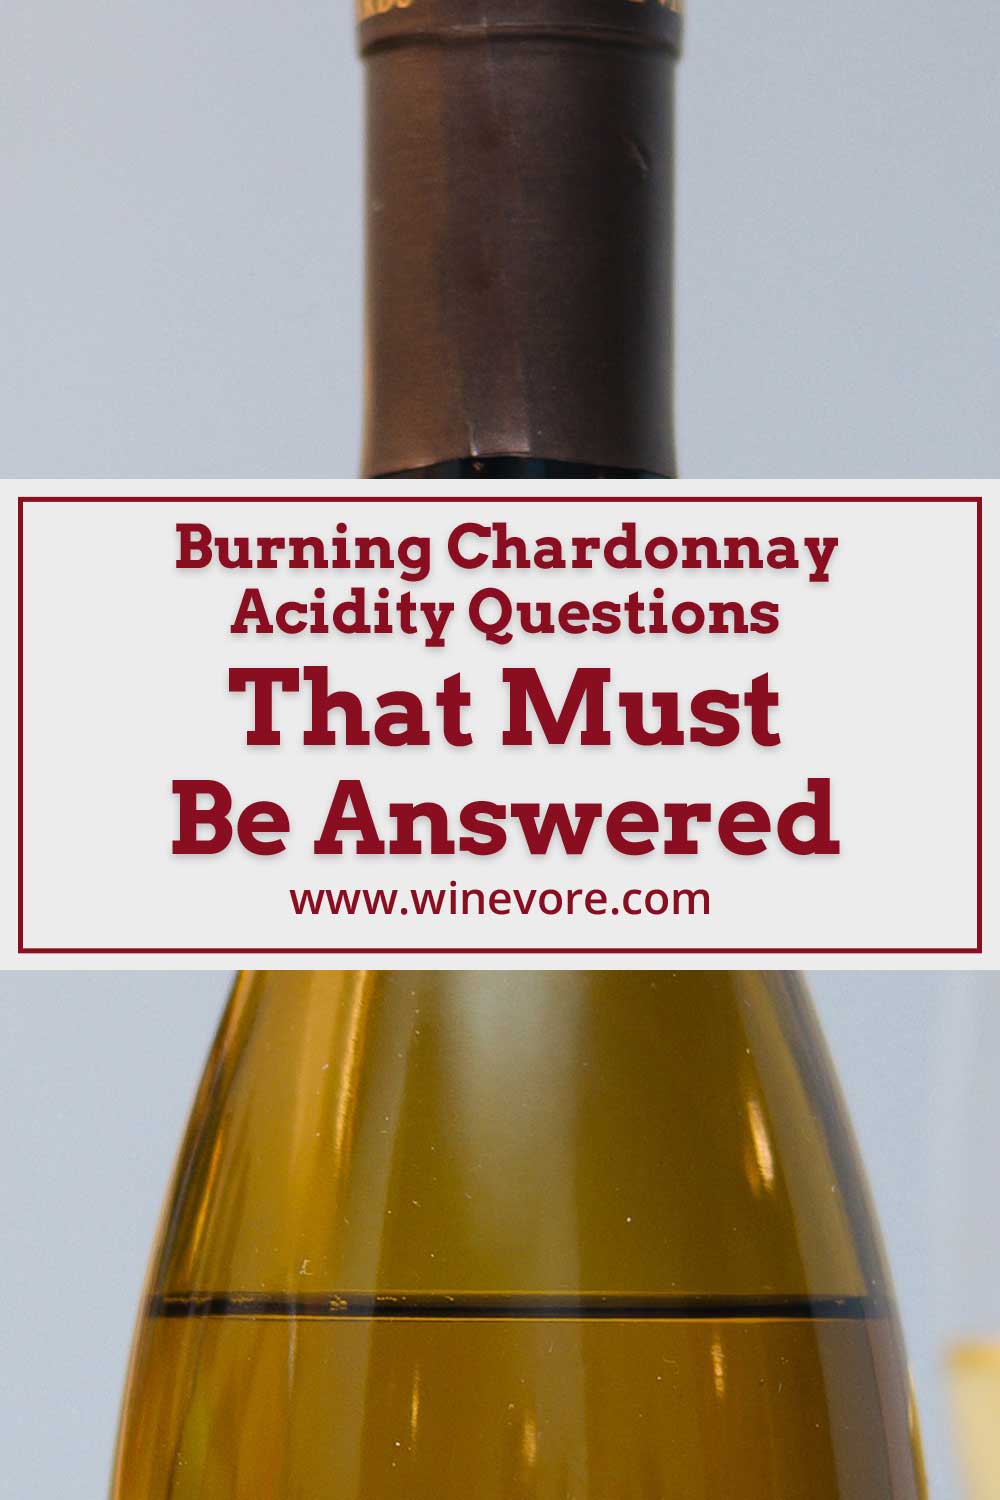 Close up of a bottle of wine - Burning Chardonnay Acidity Questions.